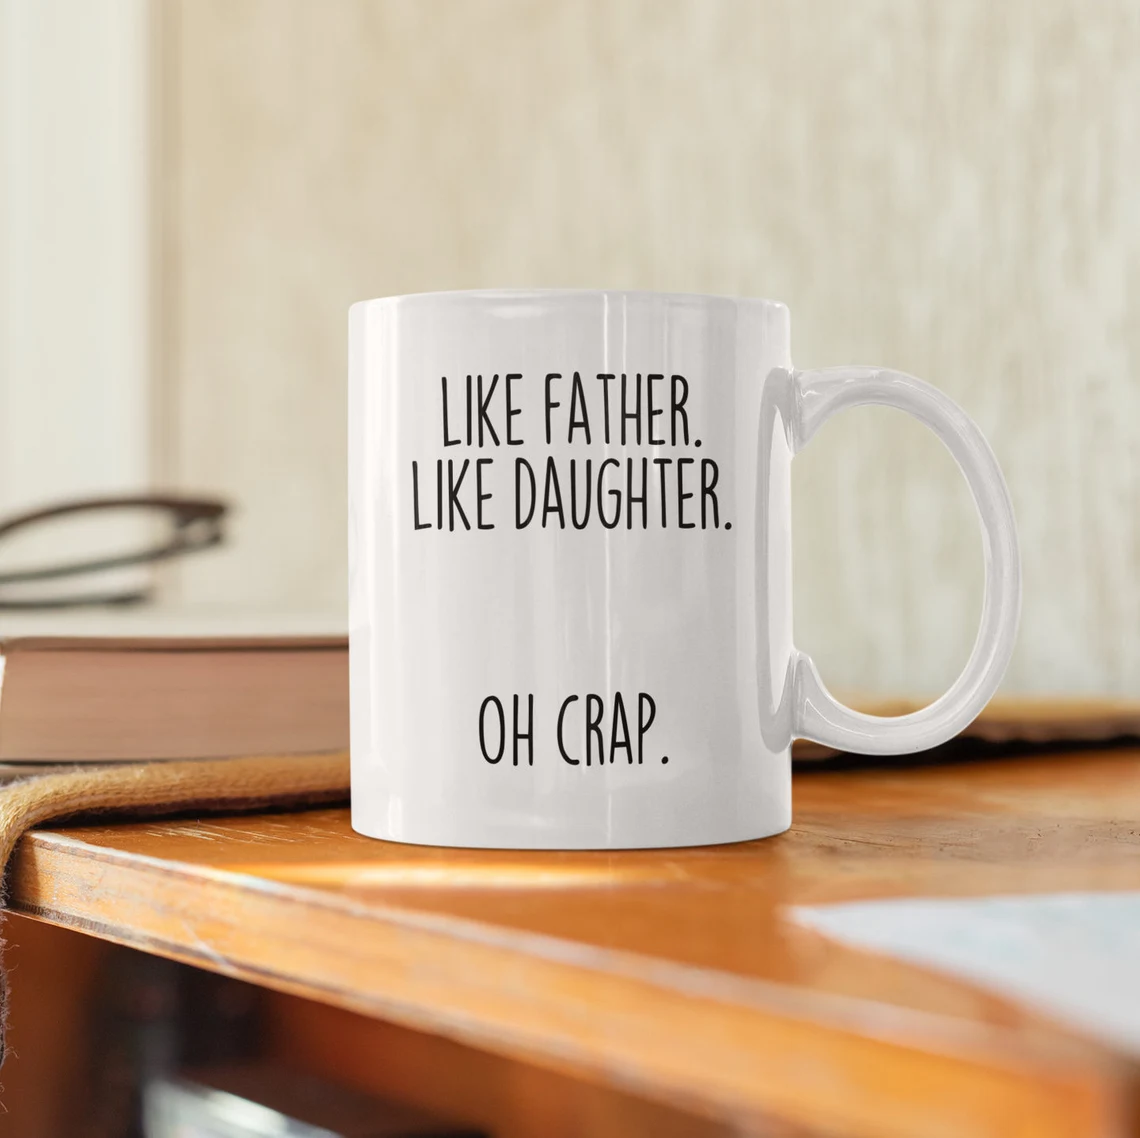 Like Father Like Daughter Mug, Dad Gifts from Daughter, Funny Dad Gift Idea, Father's Day Gift for Dad from Daughter, Funny Dad Coffee Mug